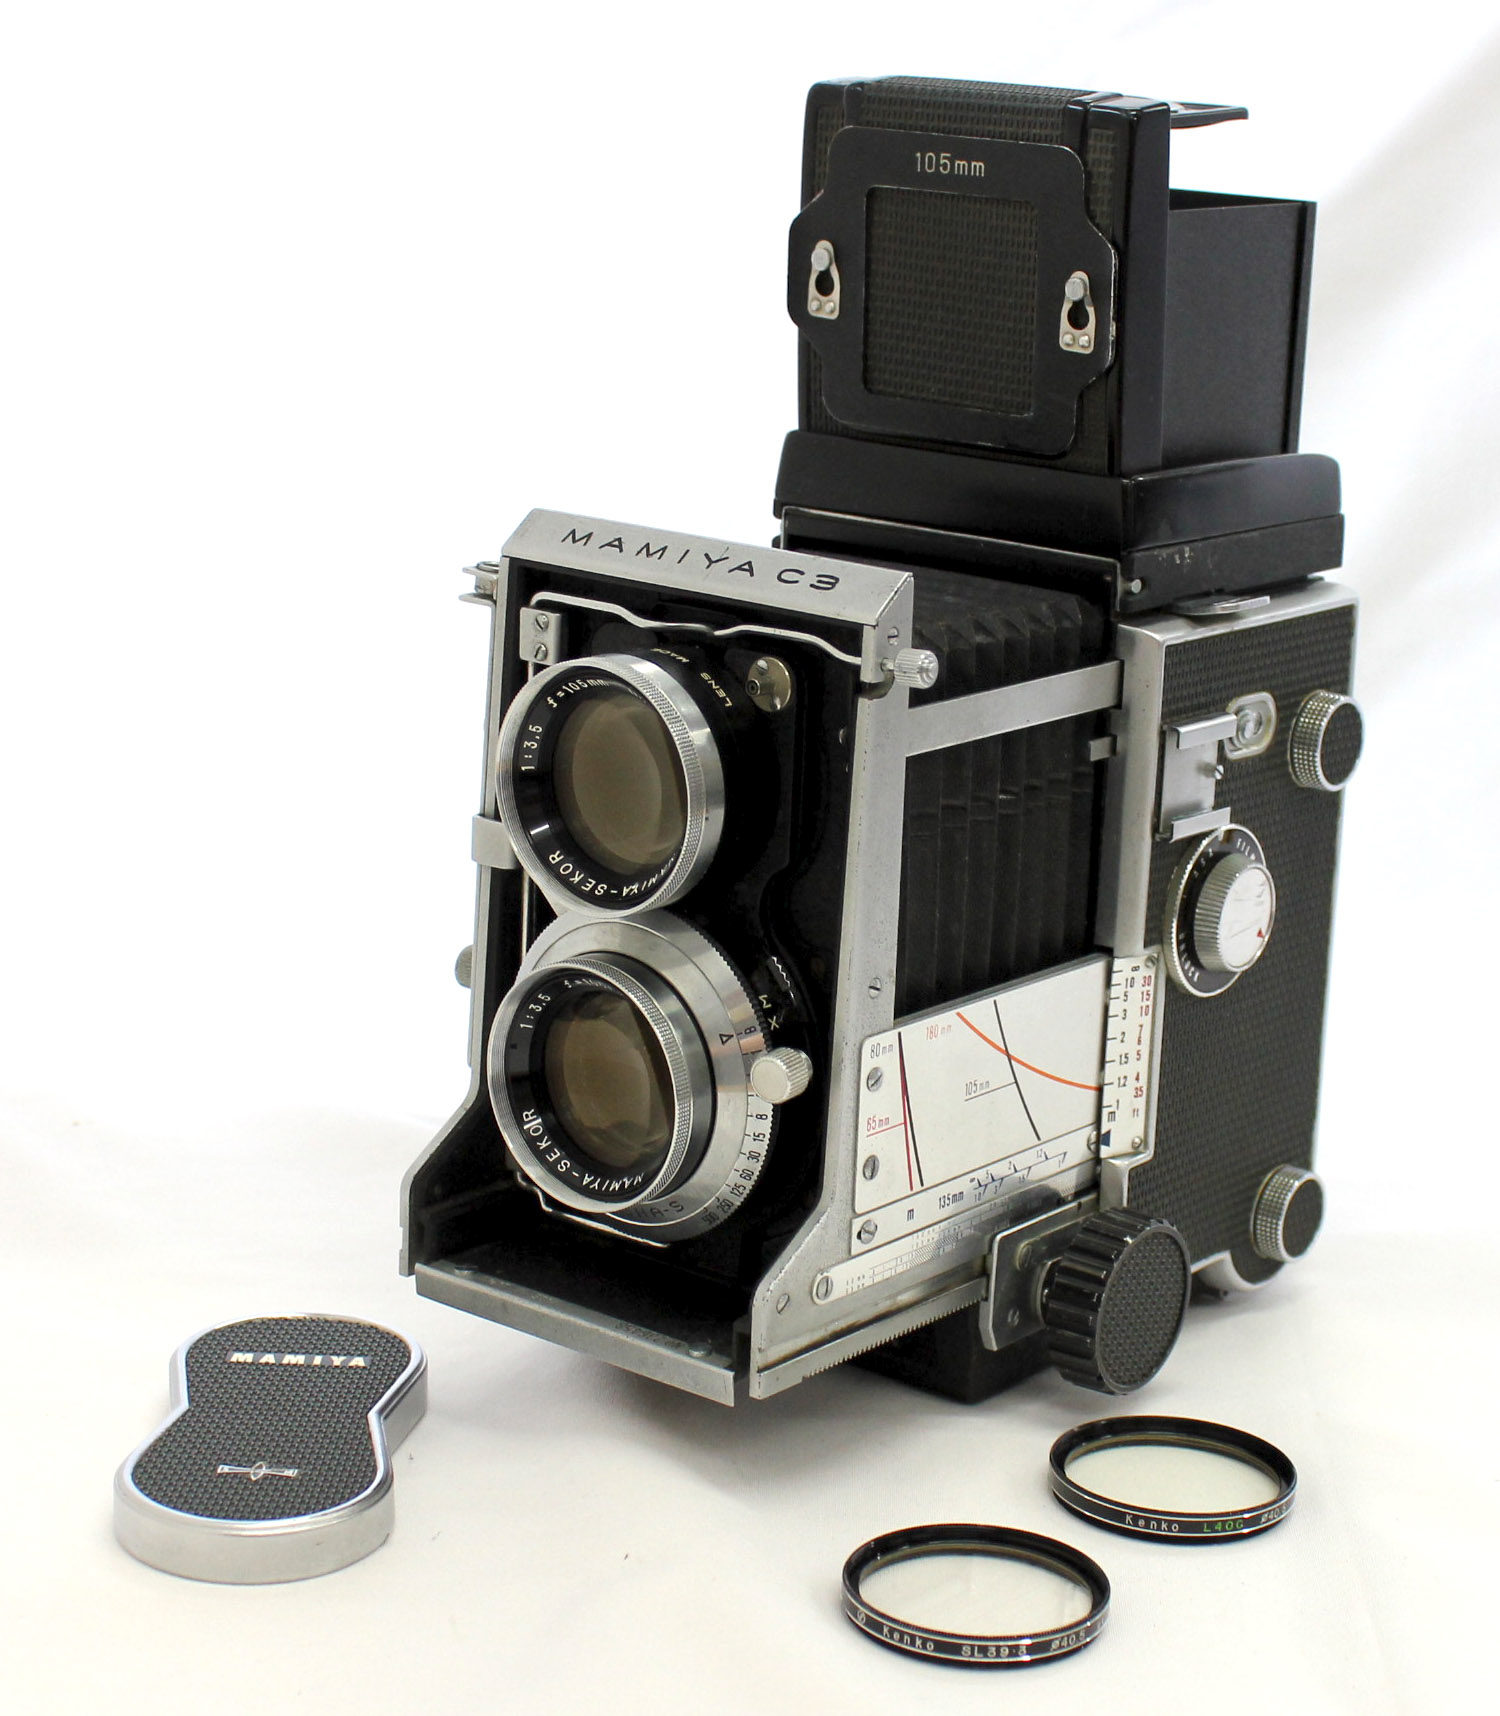 [Exc+++++] Mamiya C3 Professional Medium Format TLR Camera with 105mm F3.5 Lens from Japan